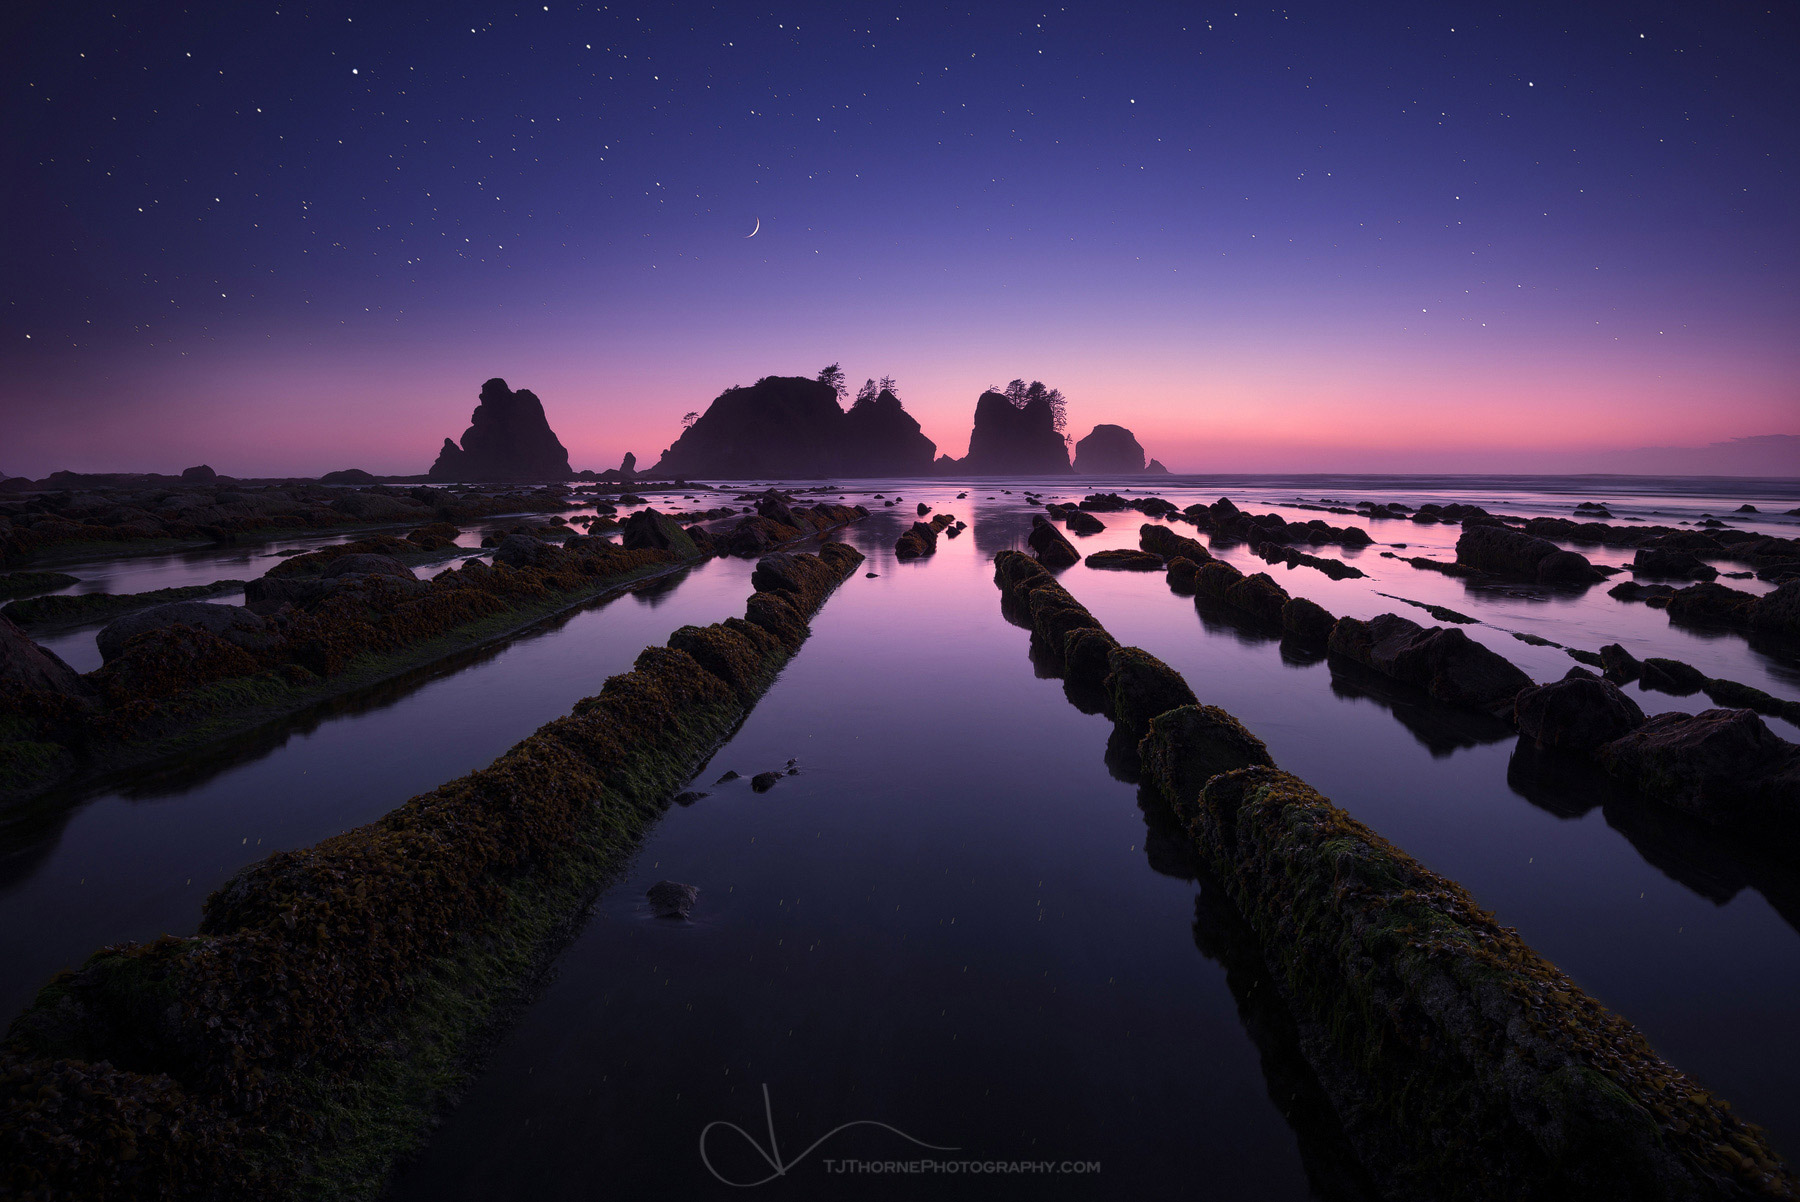 FINE ART LIMITED EDITION OF 50 Twilight at a remote beach in Olympic National Park, Washington. This was taken back in May 2016...